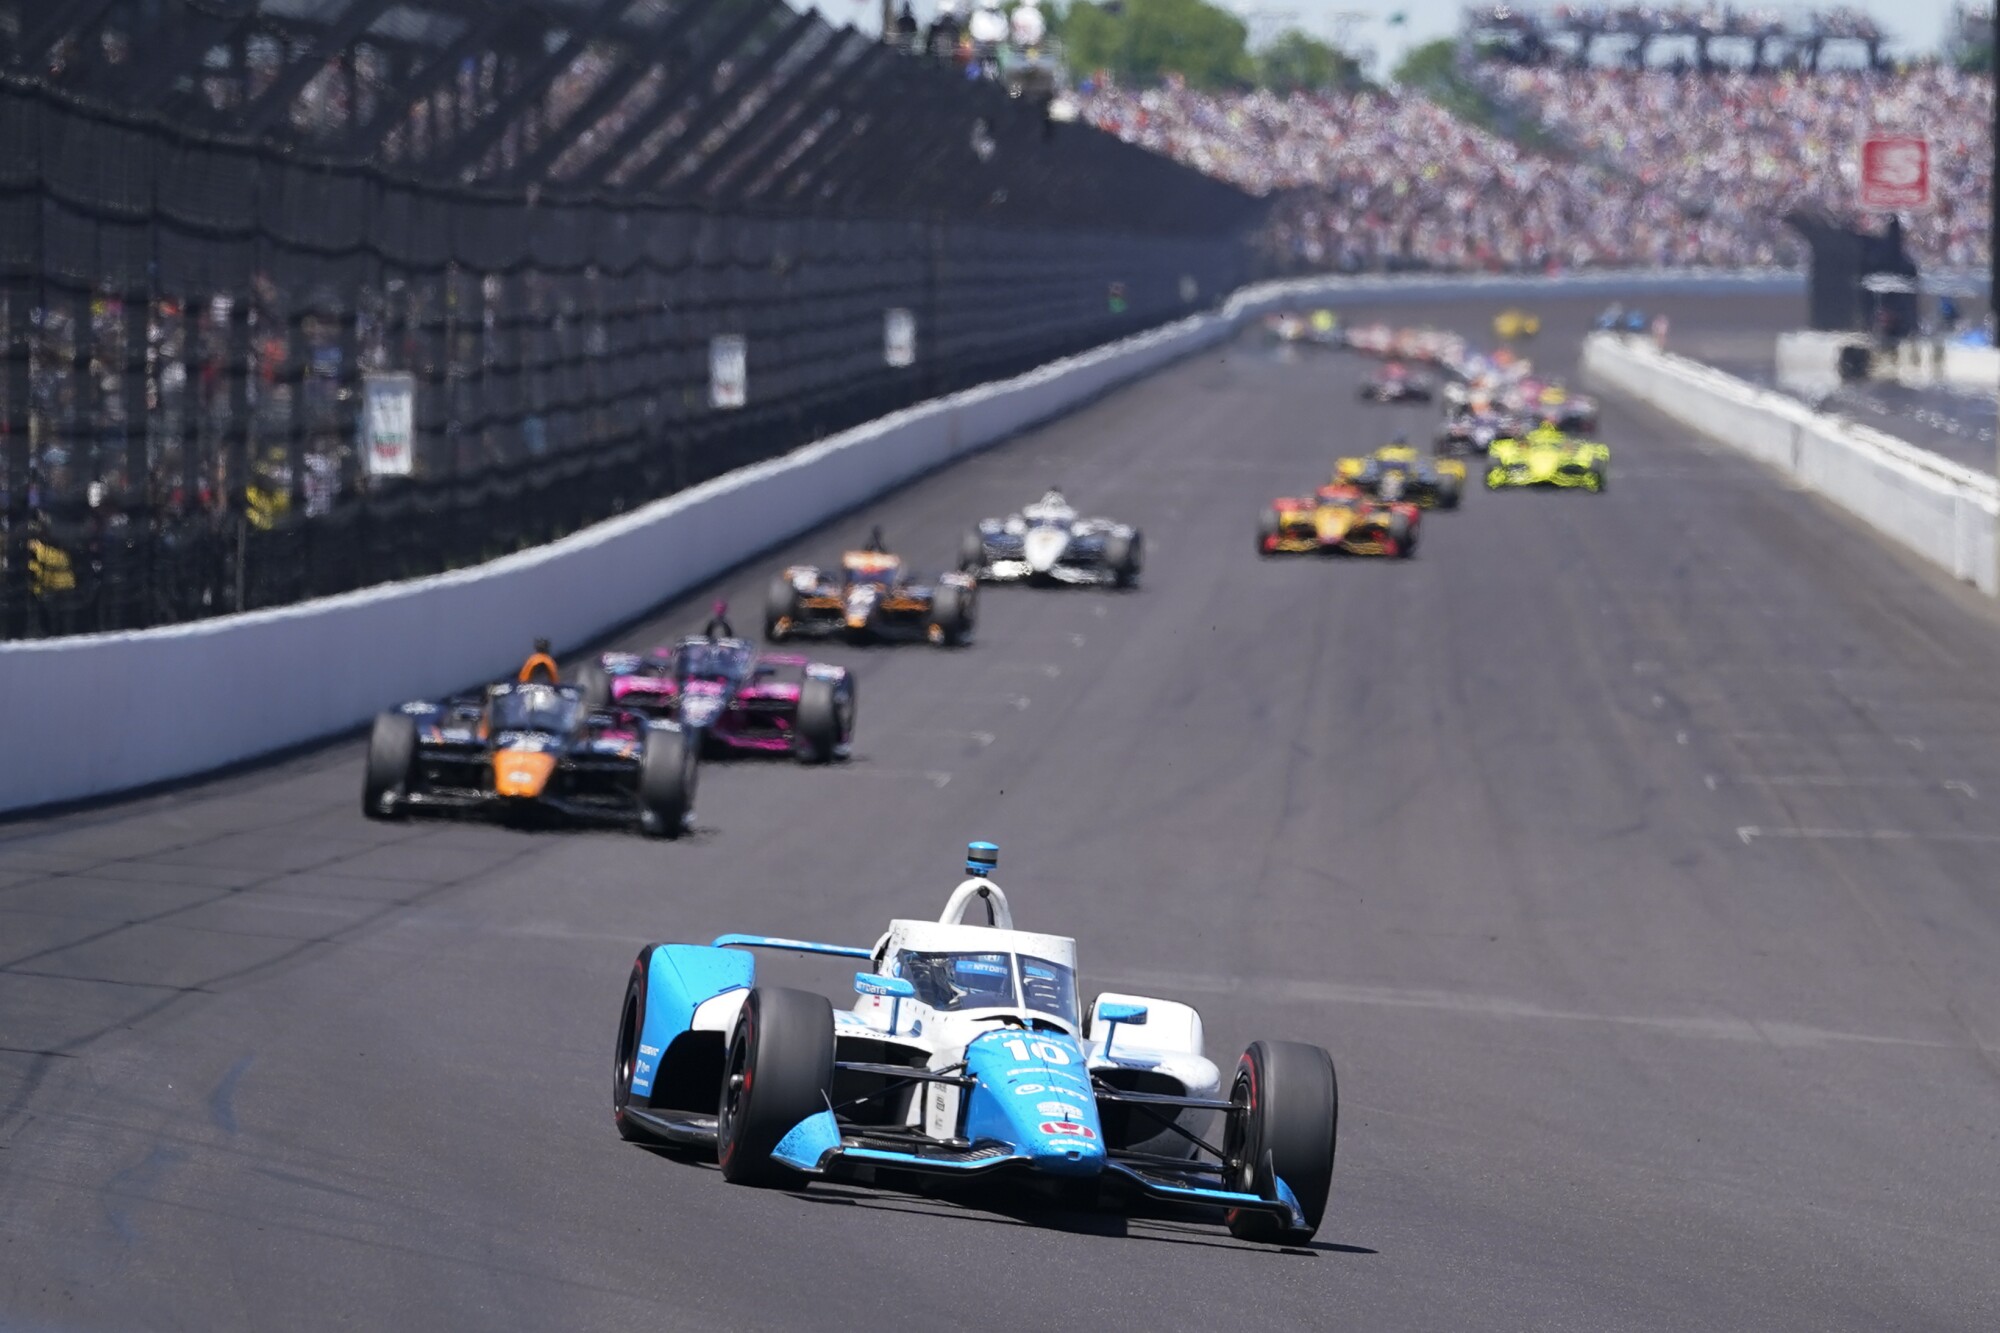 Alex Palou enters Turn 1 during the 2021 Indianapolis 500.